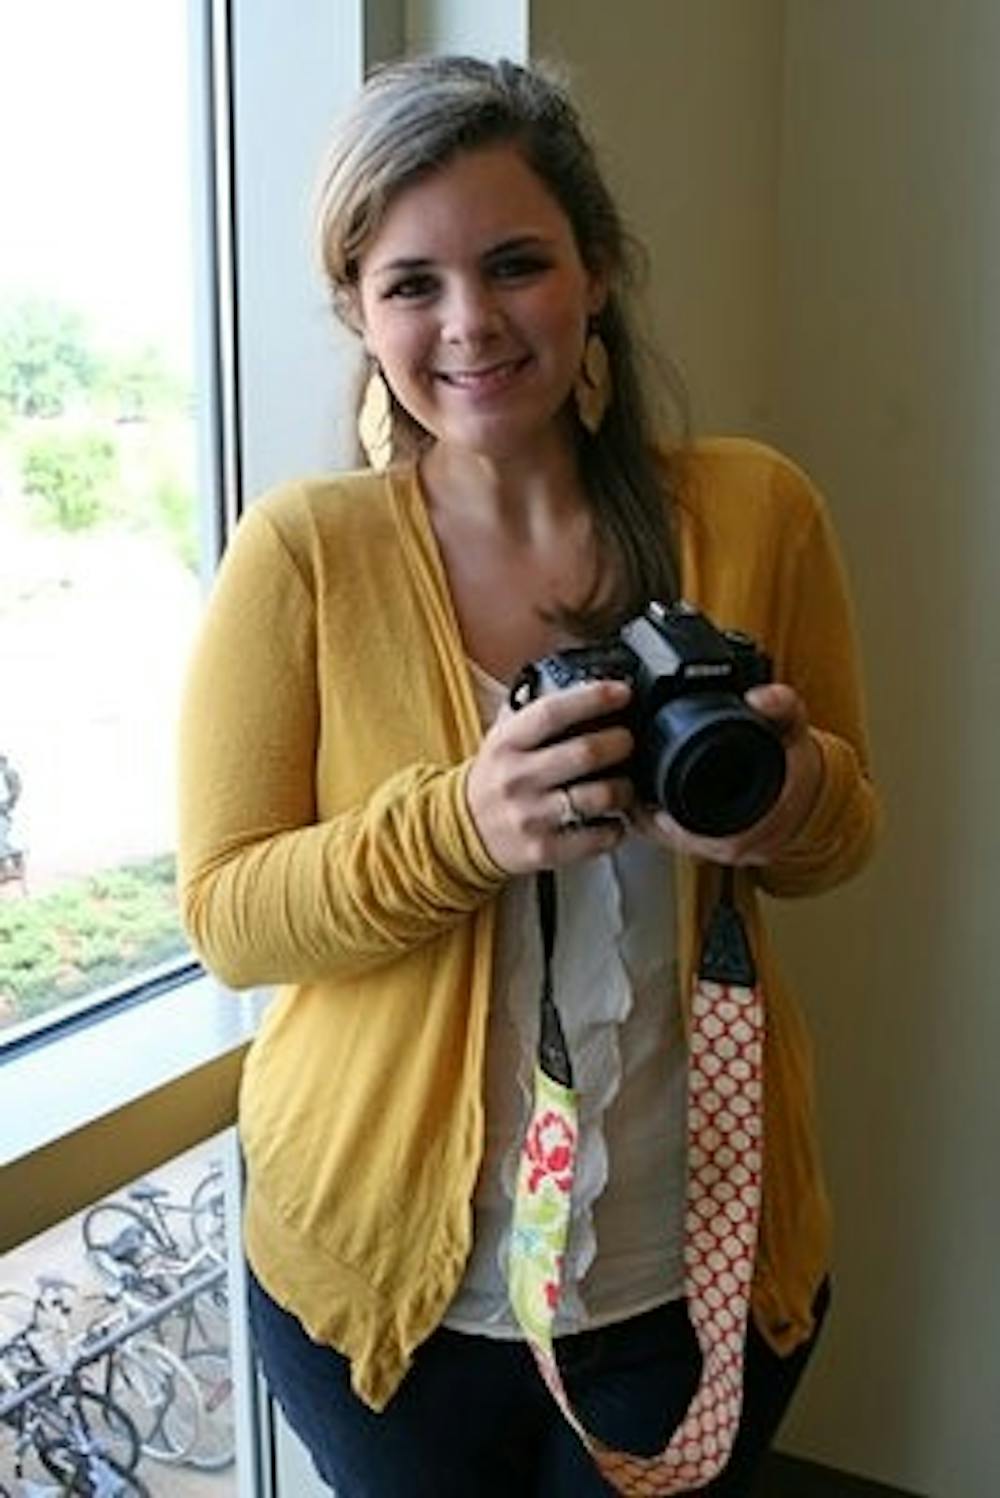 Laurel Schweers has been taking photographs since she was 6 years old. (Rebecca Croomes / Photo Editor)